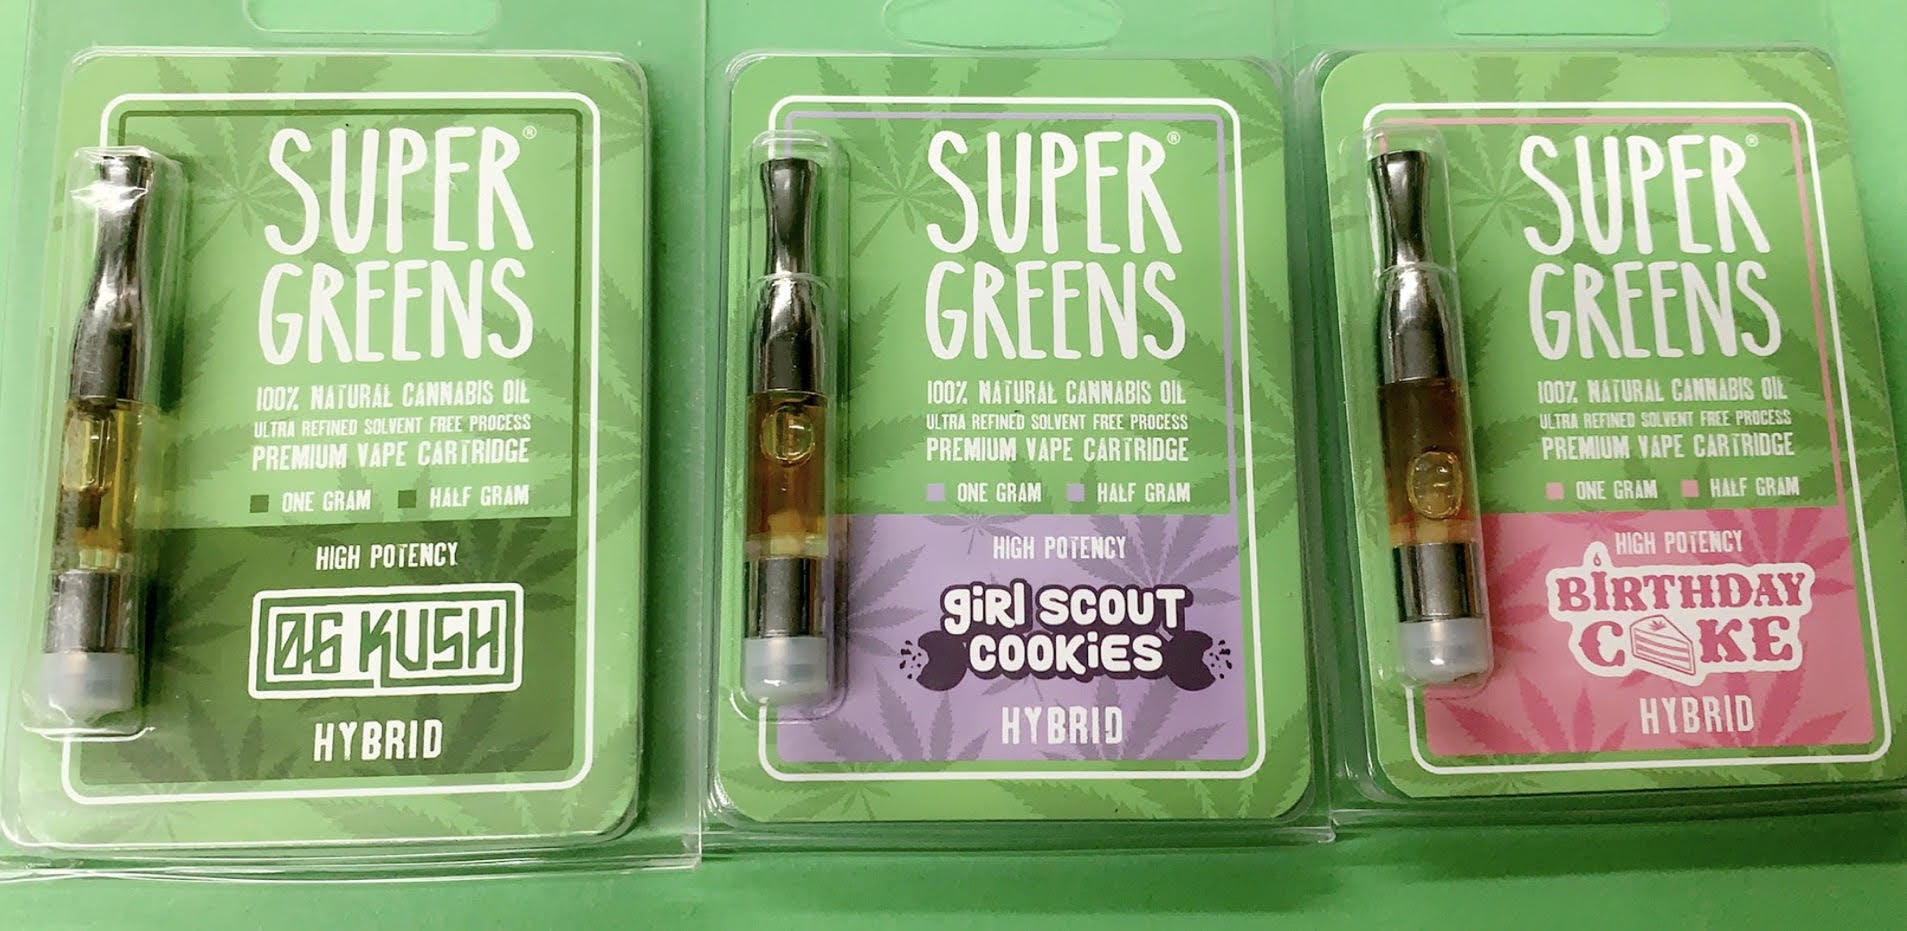 concentrate-super-greens